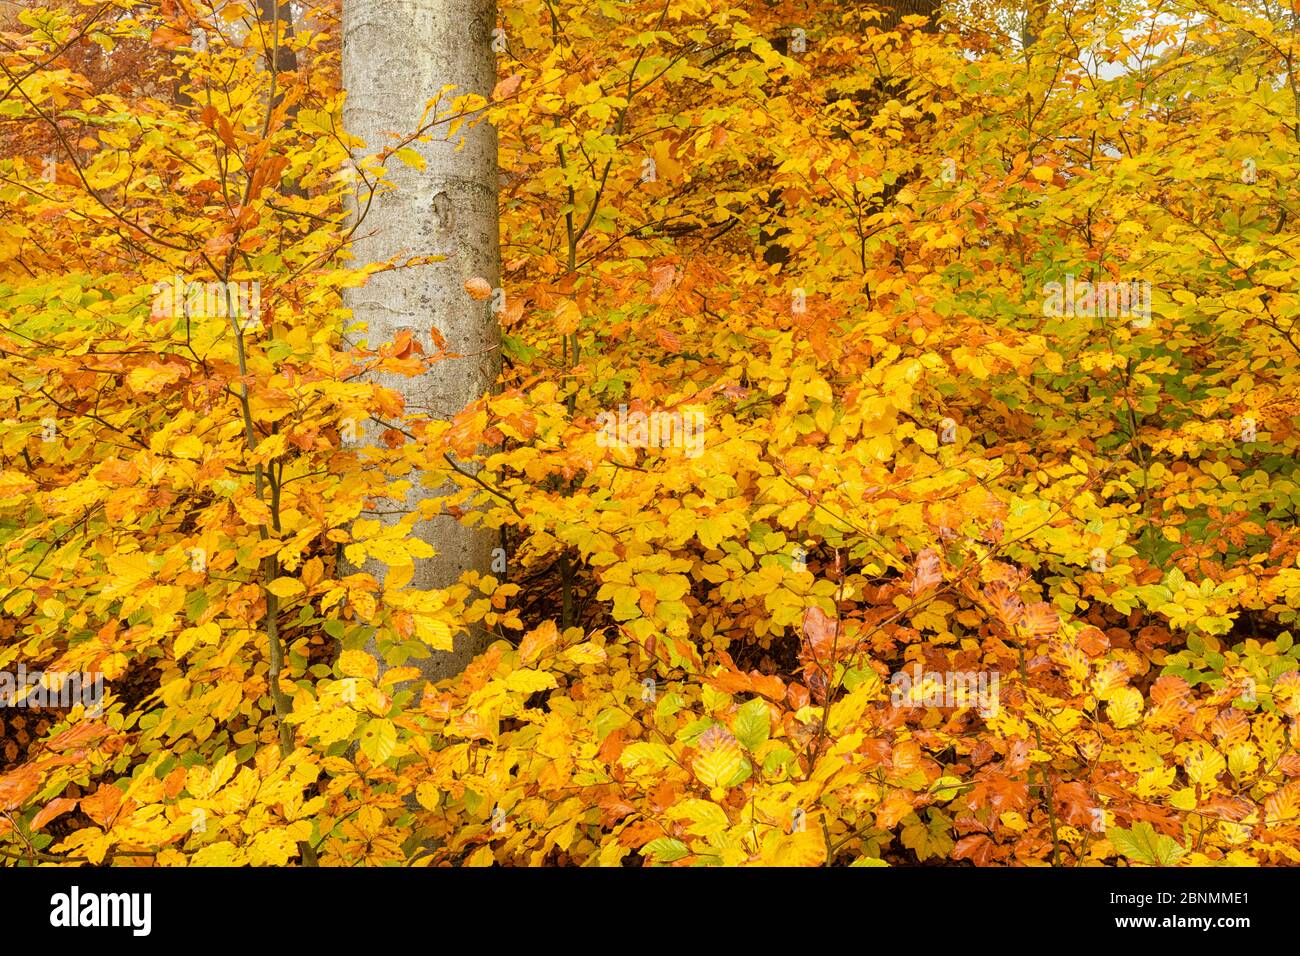 Beech (Fagus sylvatica) forest with leaves in autumn colours, Germany, November. Stock Photo